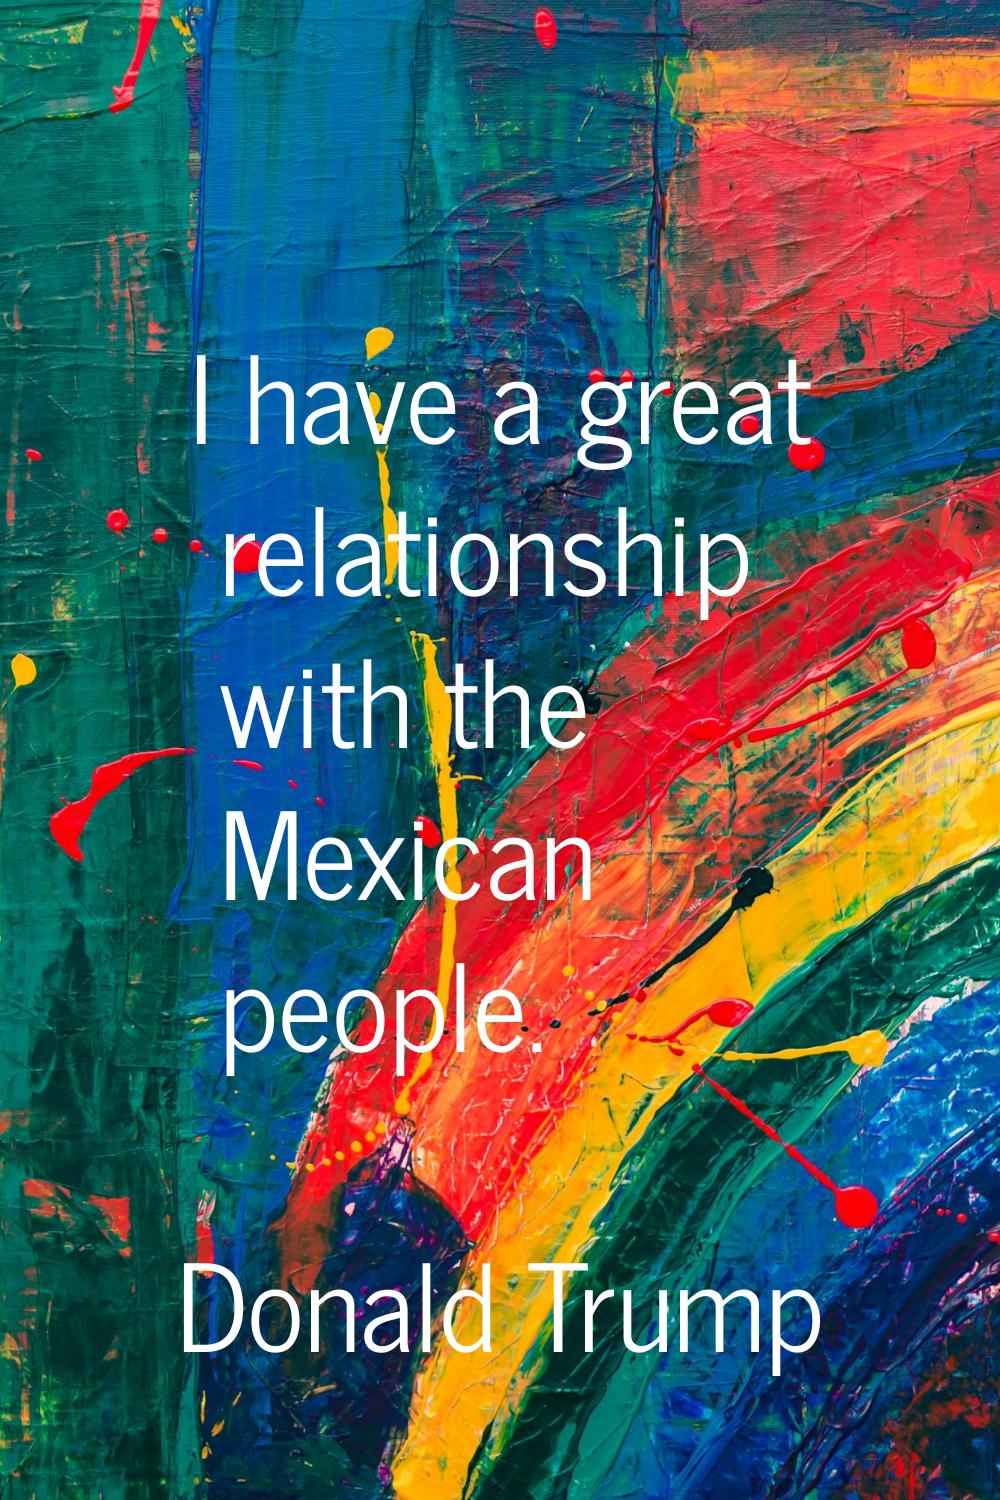 I have a great relationship with the Mexican people.